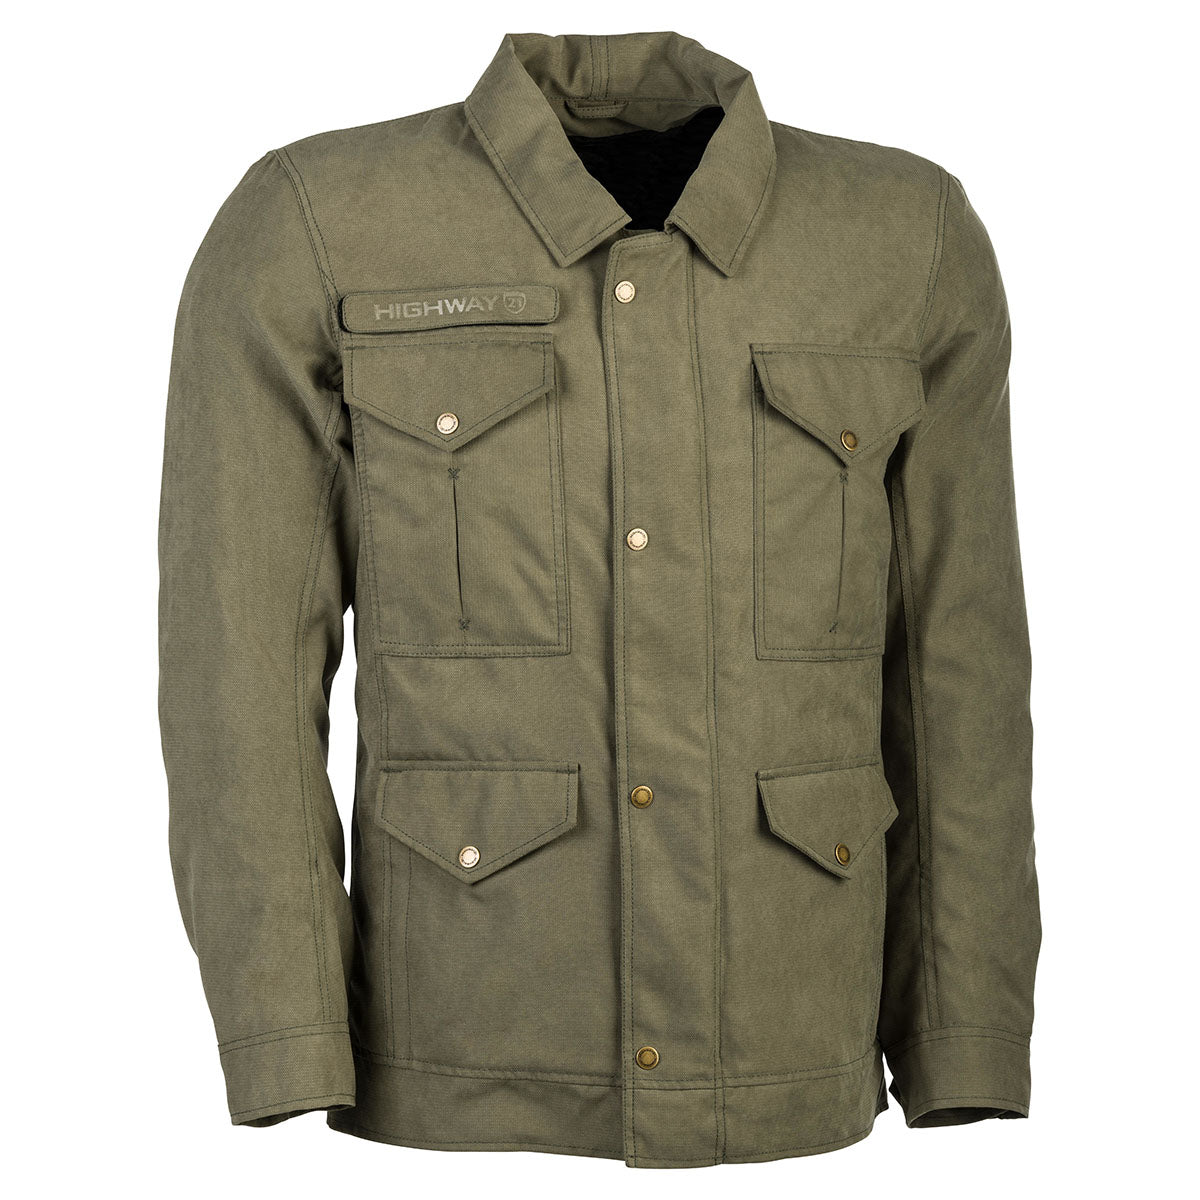 Highway 21 Winchester Jacket 489-1021L